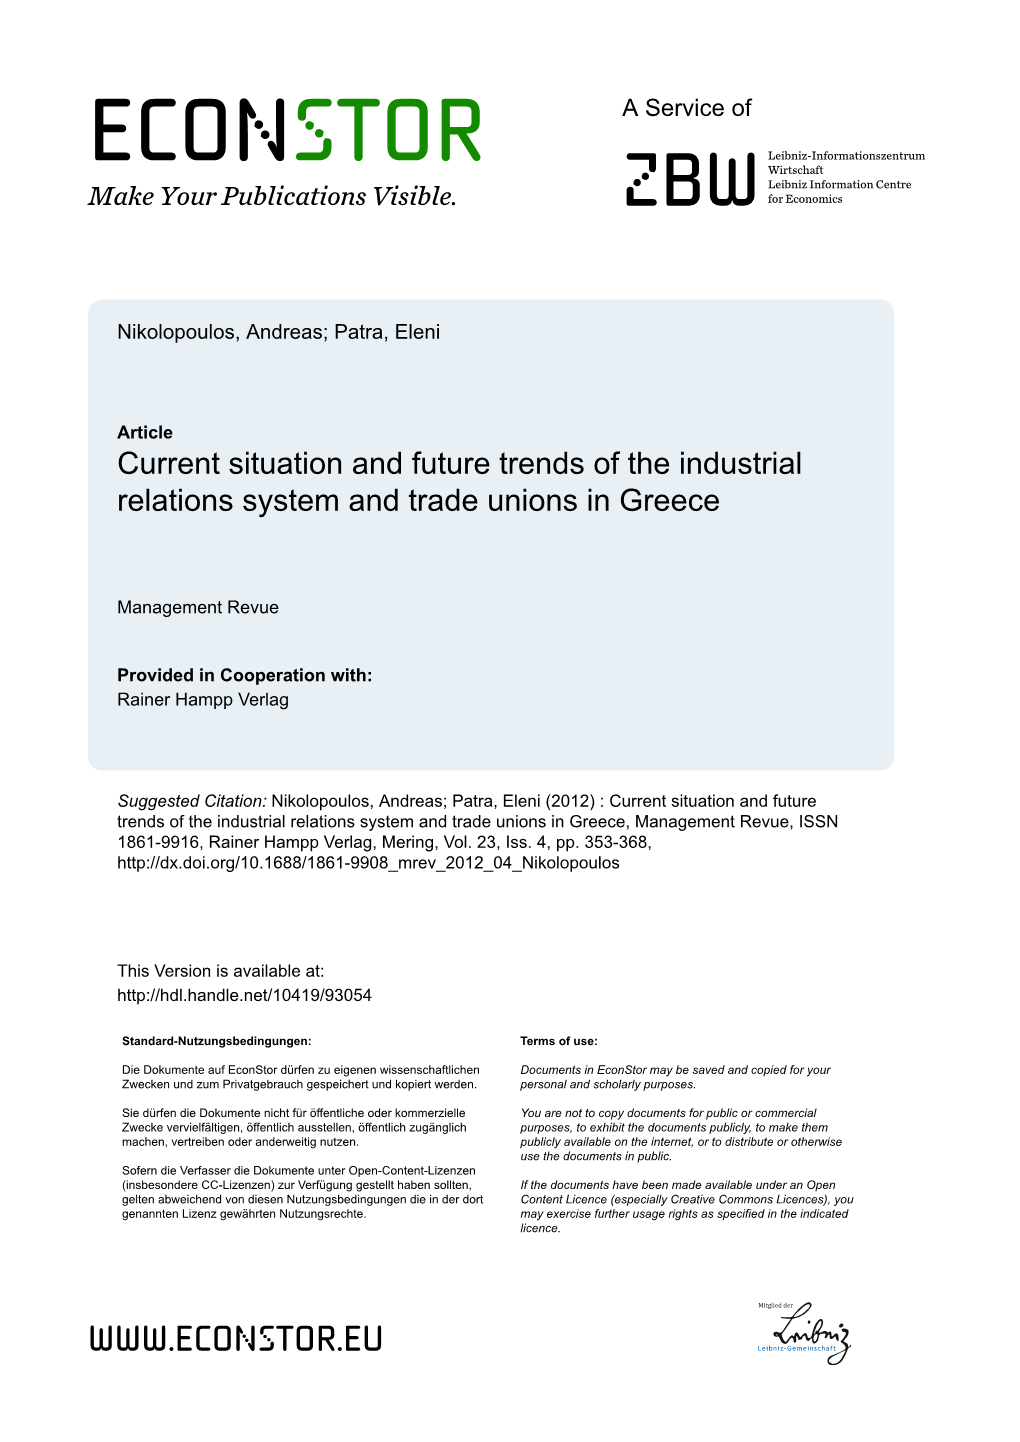 Current Situation and Future Trends of the Industrial Relations System and Trade Unions in Greece